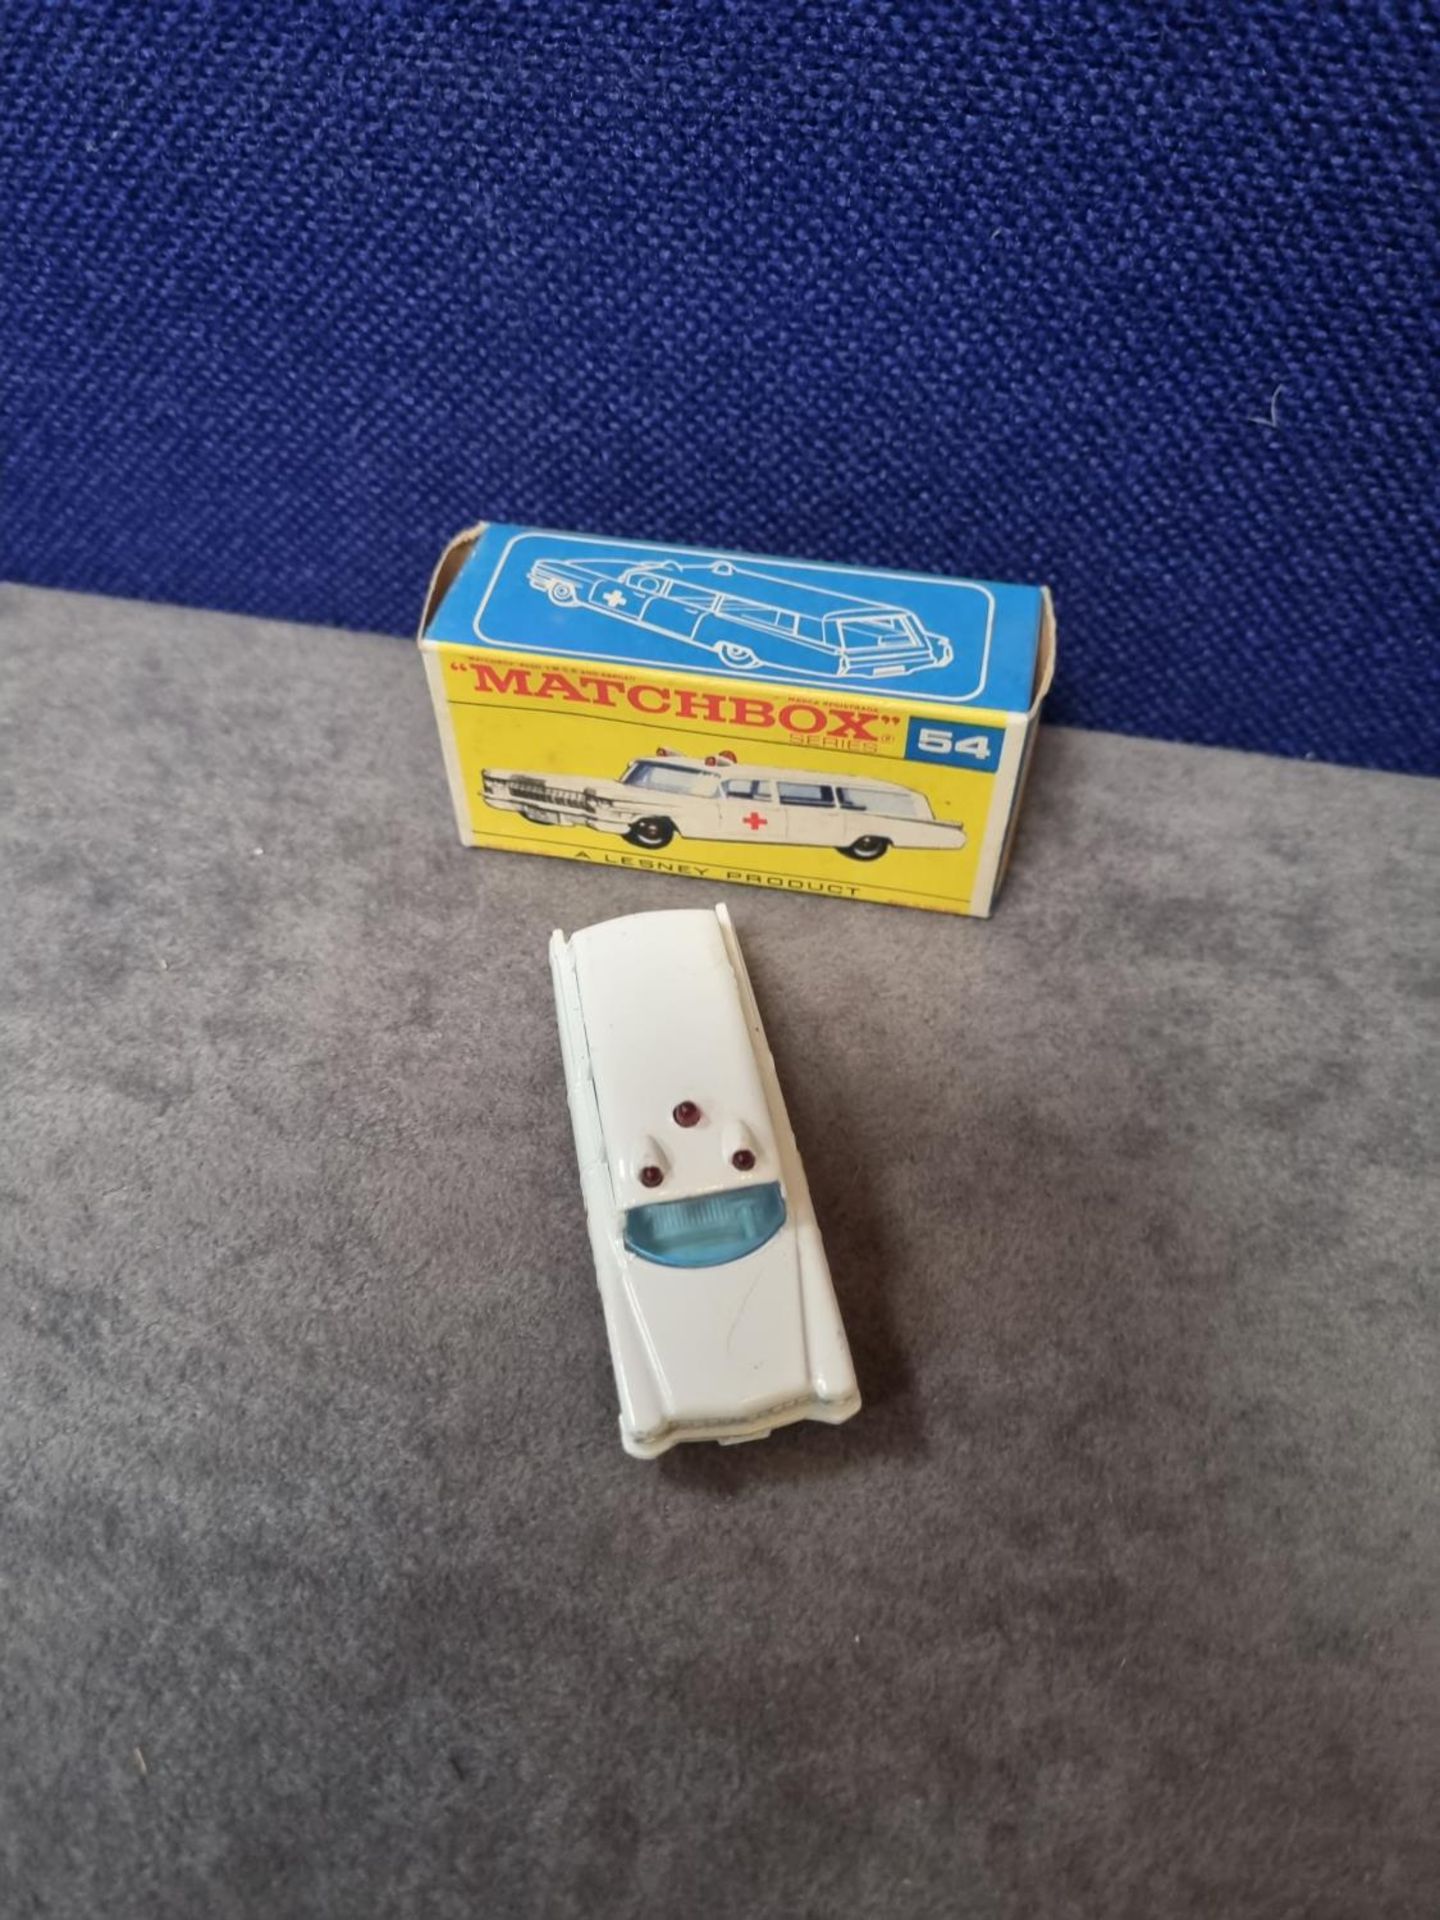 Matchbox Lesney Diecast #54b Cadillac Ambulance 1965-69 Mint Model In Firm F Type Box - Image 2 of 5